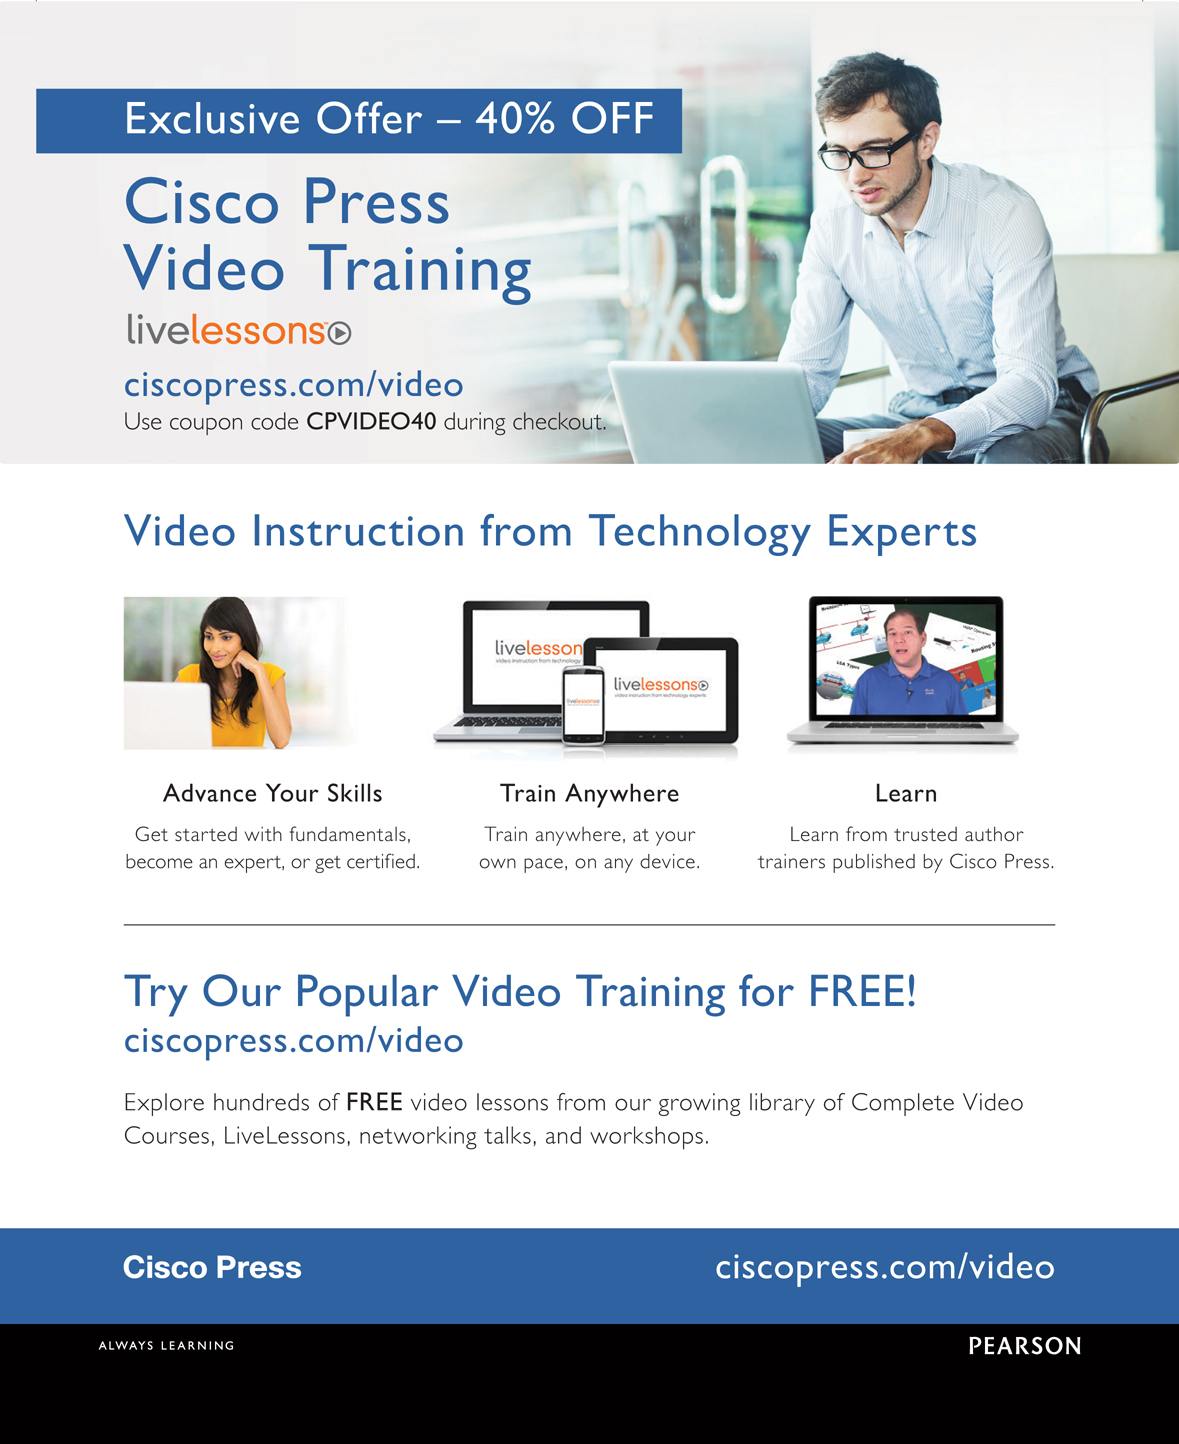 A page shows the details about the exclusive offers of the Cisco press video training. Getting video instructions from technology experts, advanced skills, learning from the trusted author are the details listed. A description of free video training is also presented.